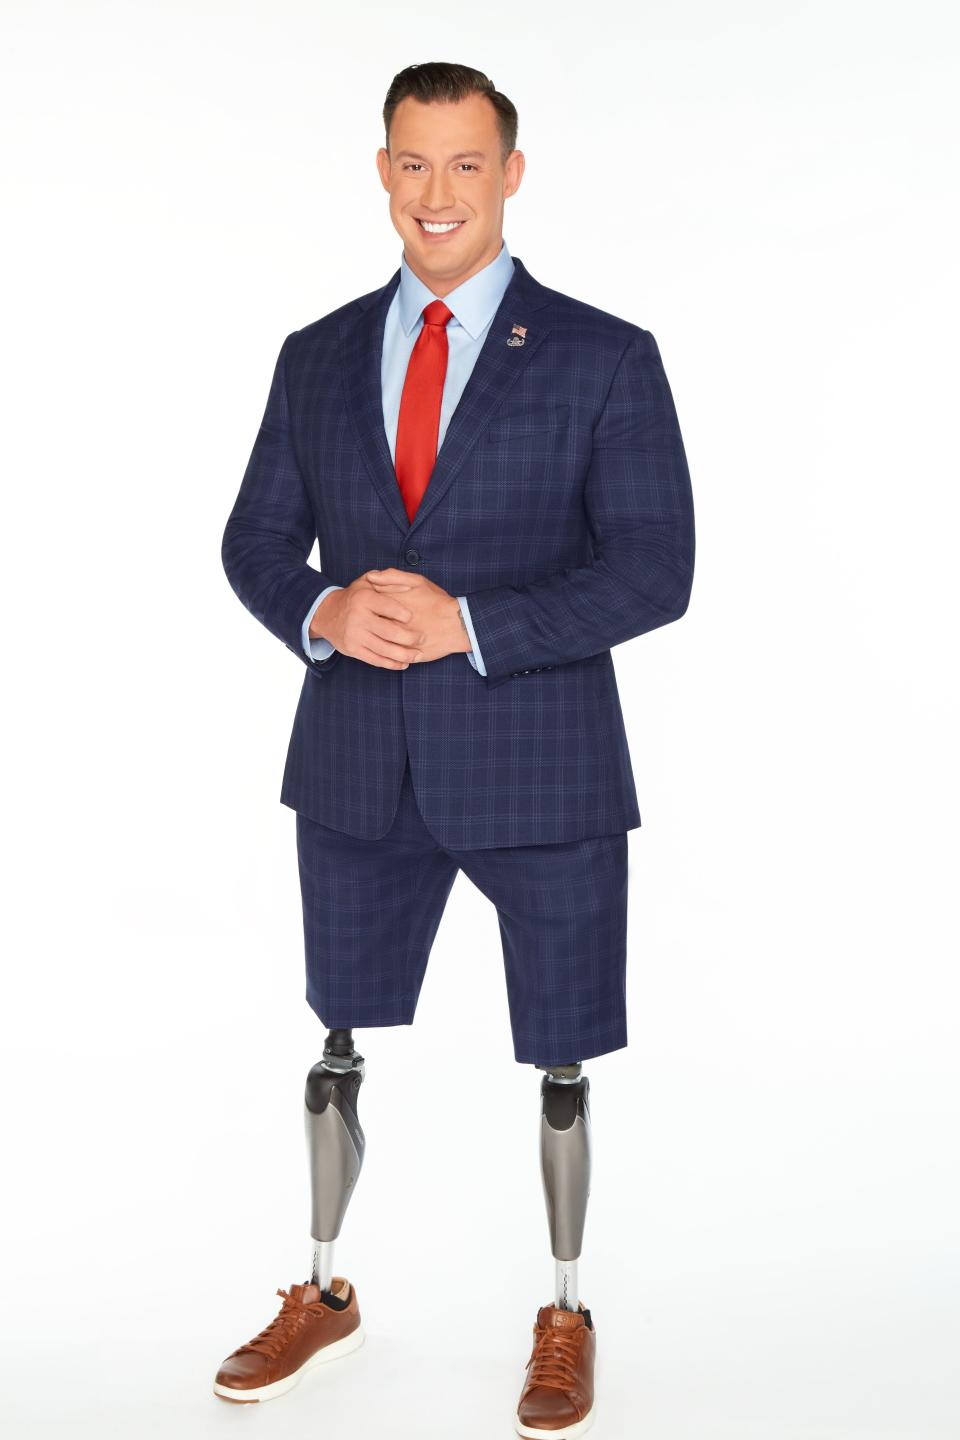 Johnny Joey Jones, a Fox News contributor since 2019, lost his legs above the knee in Afghanistan.